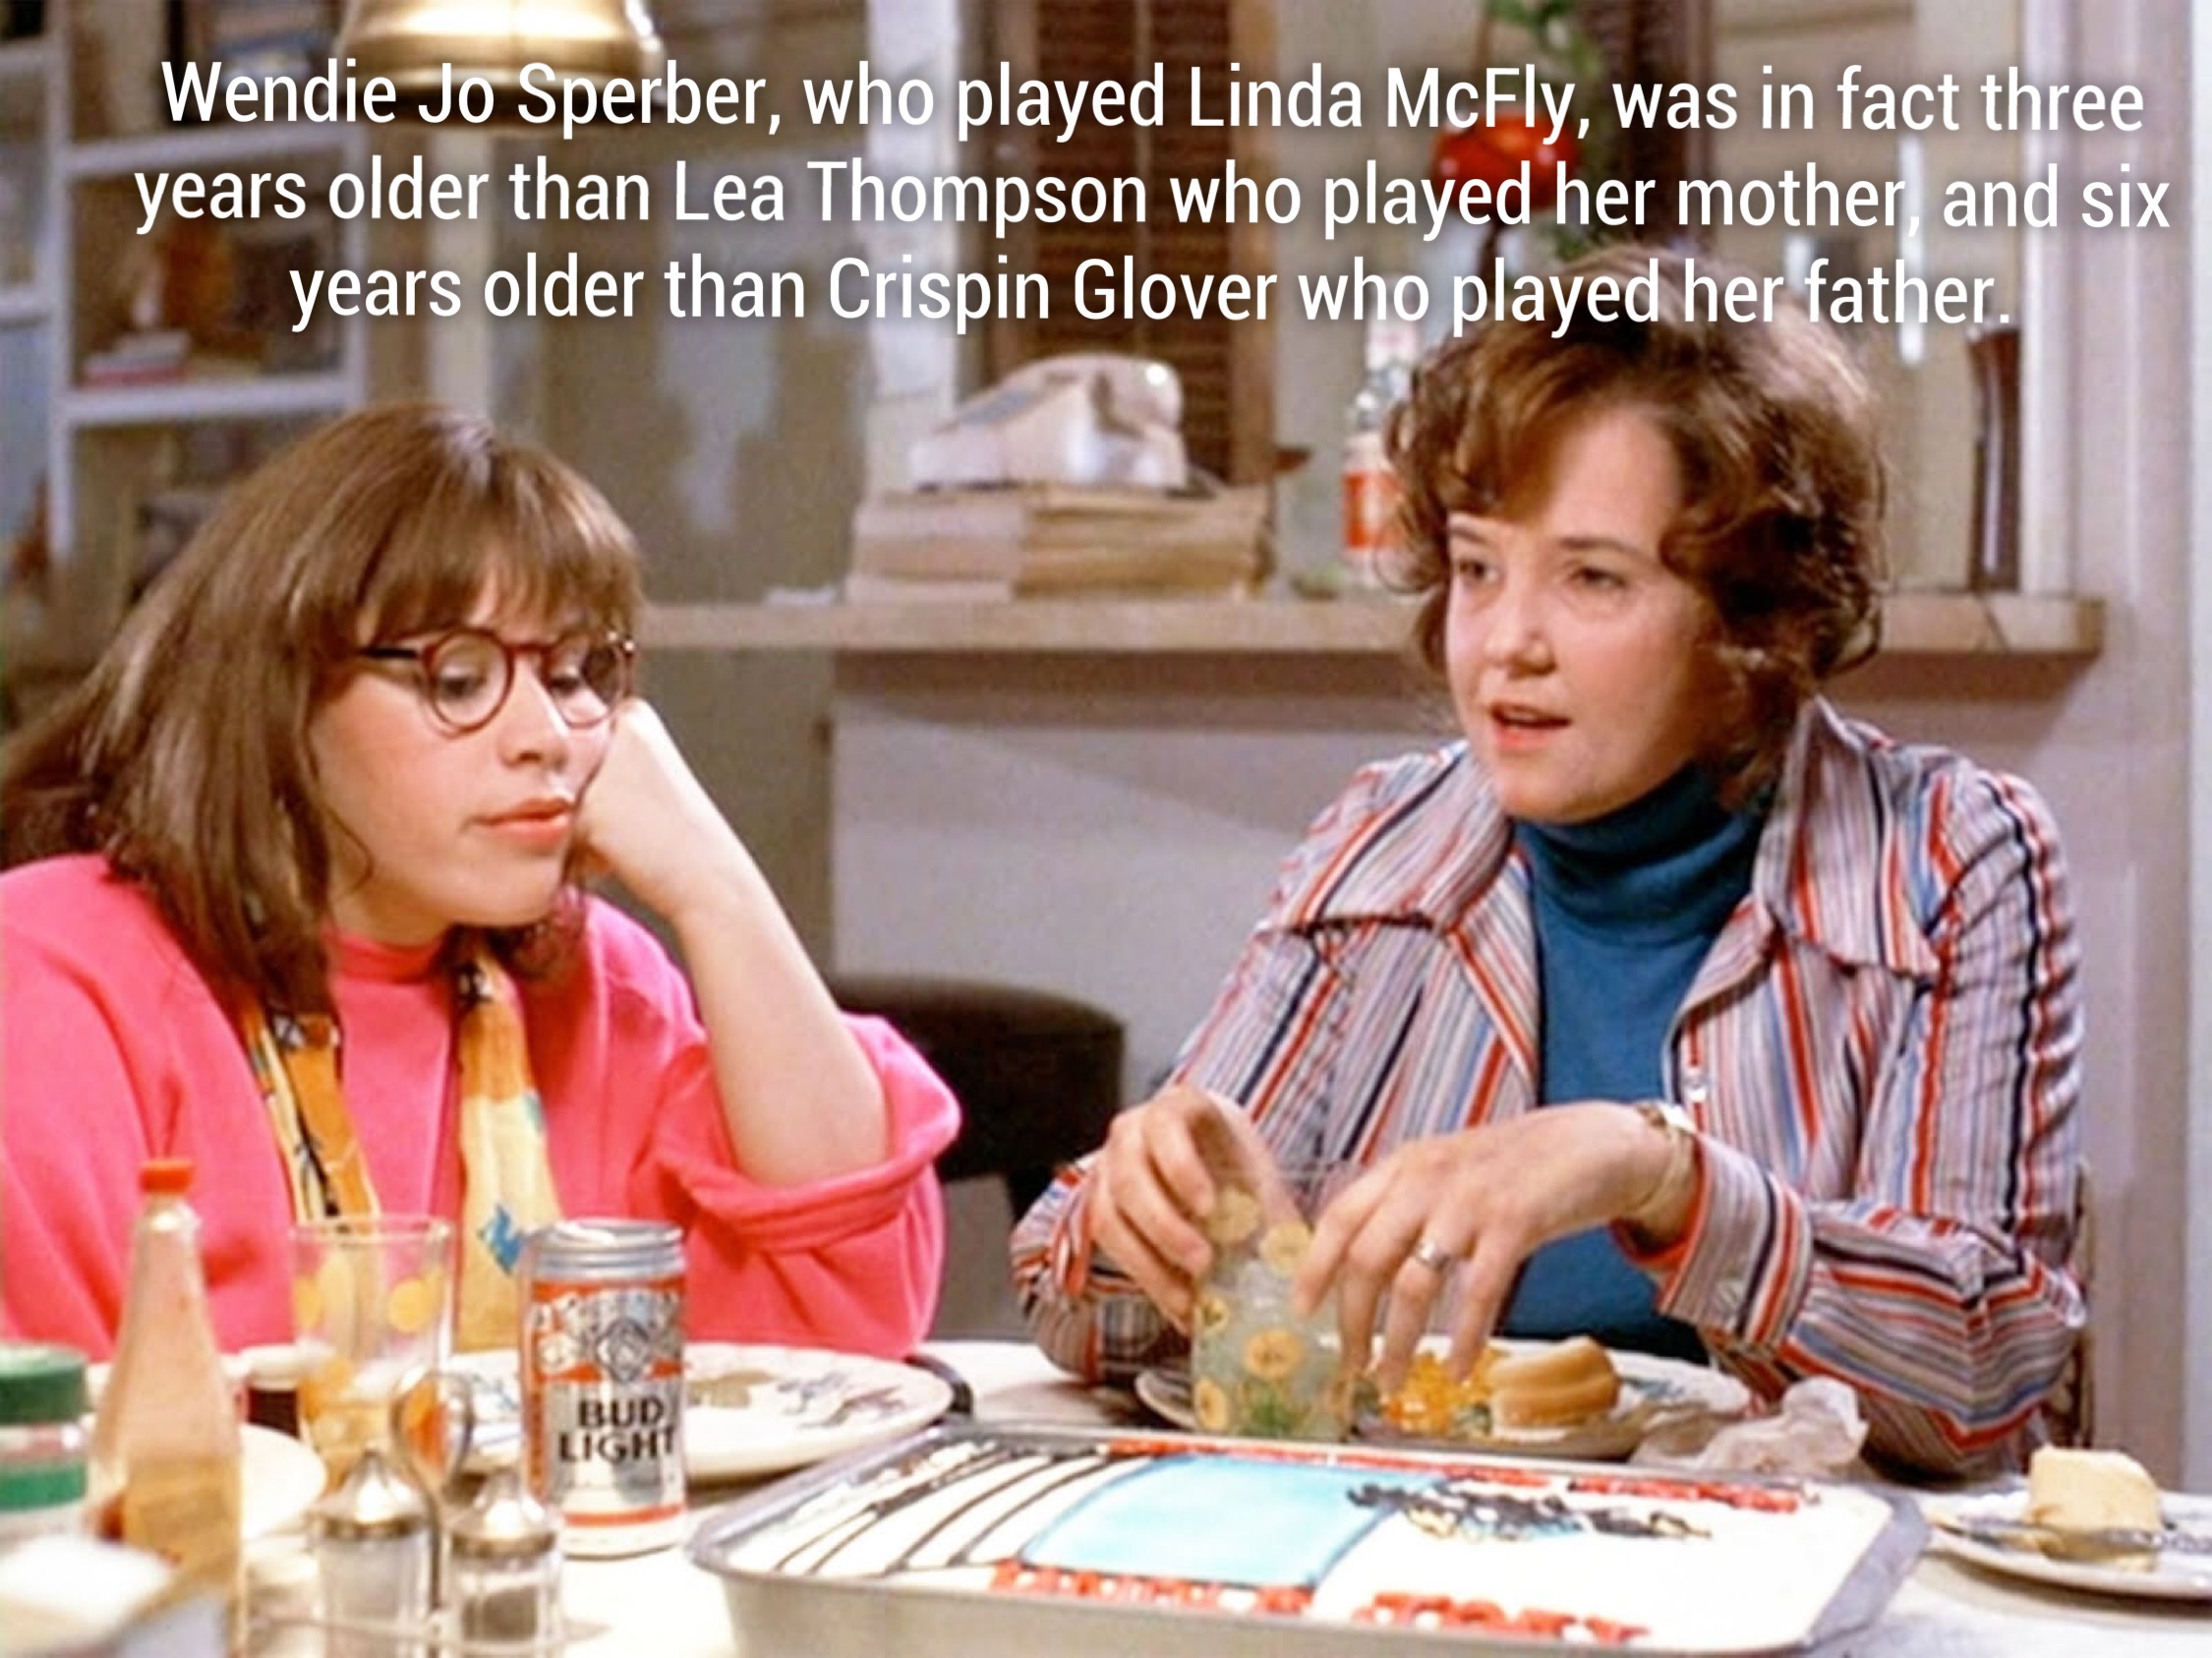 back to the future linda mcfly - Wendie Jo Sperber, who played Linda McFly, was in fact three years older than Lea Thompson who played her mother and six years older than Crispin Glover who played her father.